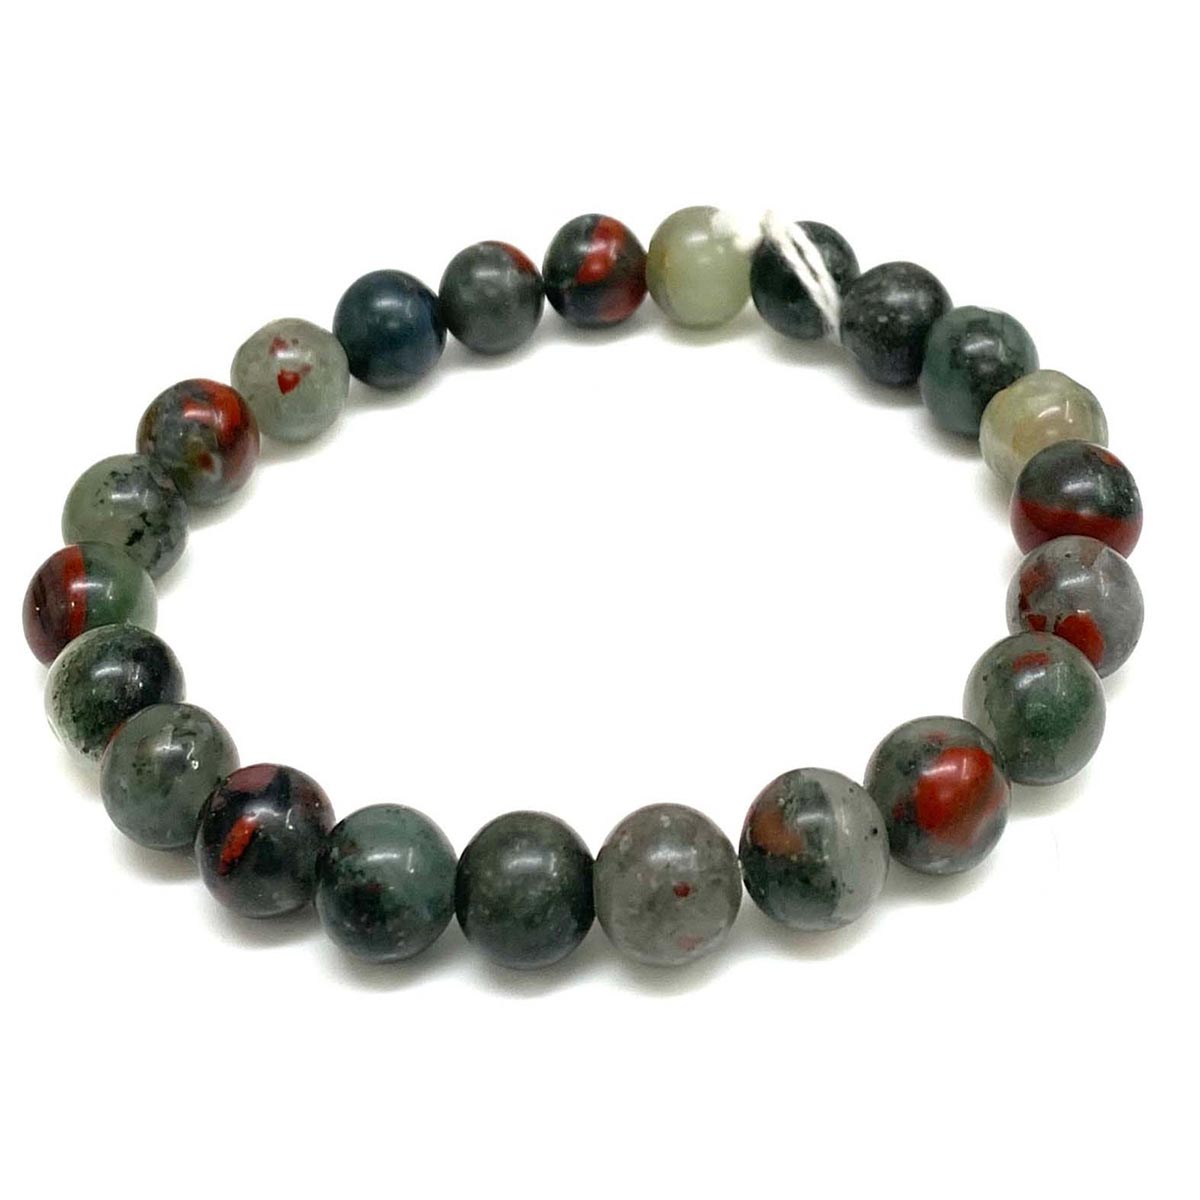 New African Handcrafted  Natural  Round Bead  Stretchy  Bracelet 